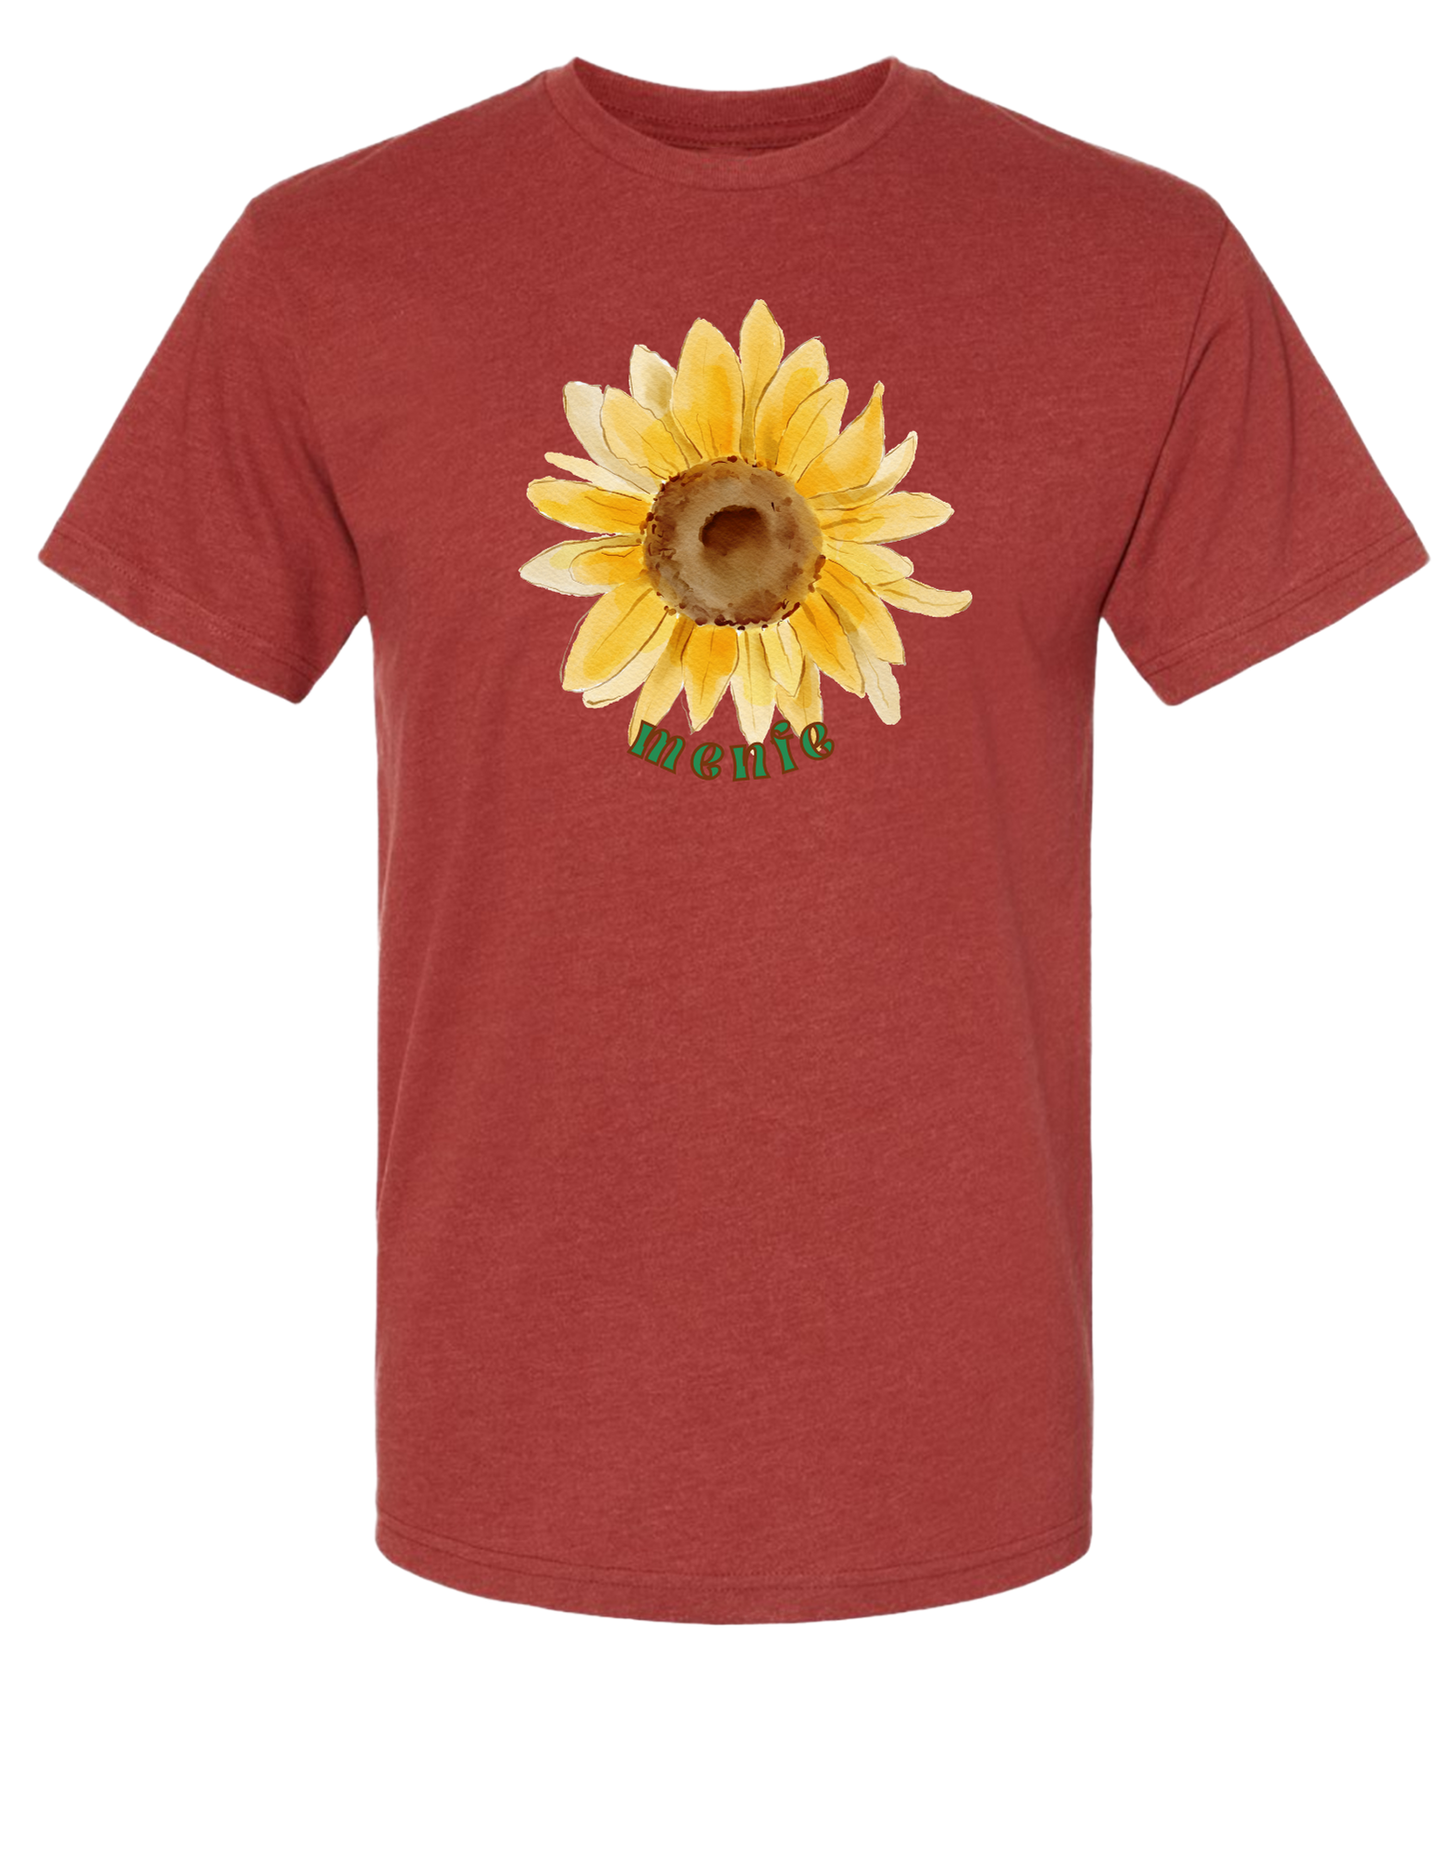 Sunflower T-Shirt - Heather Pacific, Heather Teja and Natural